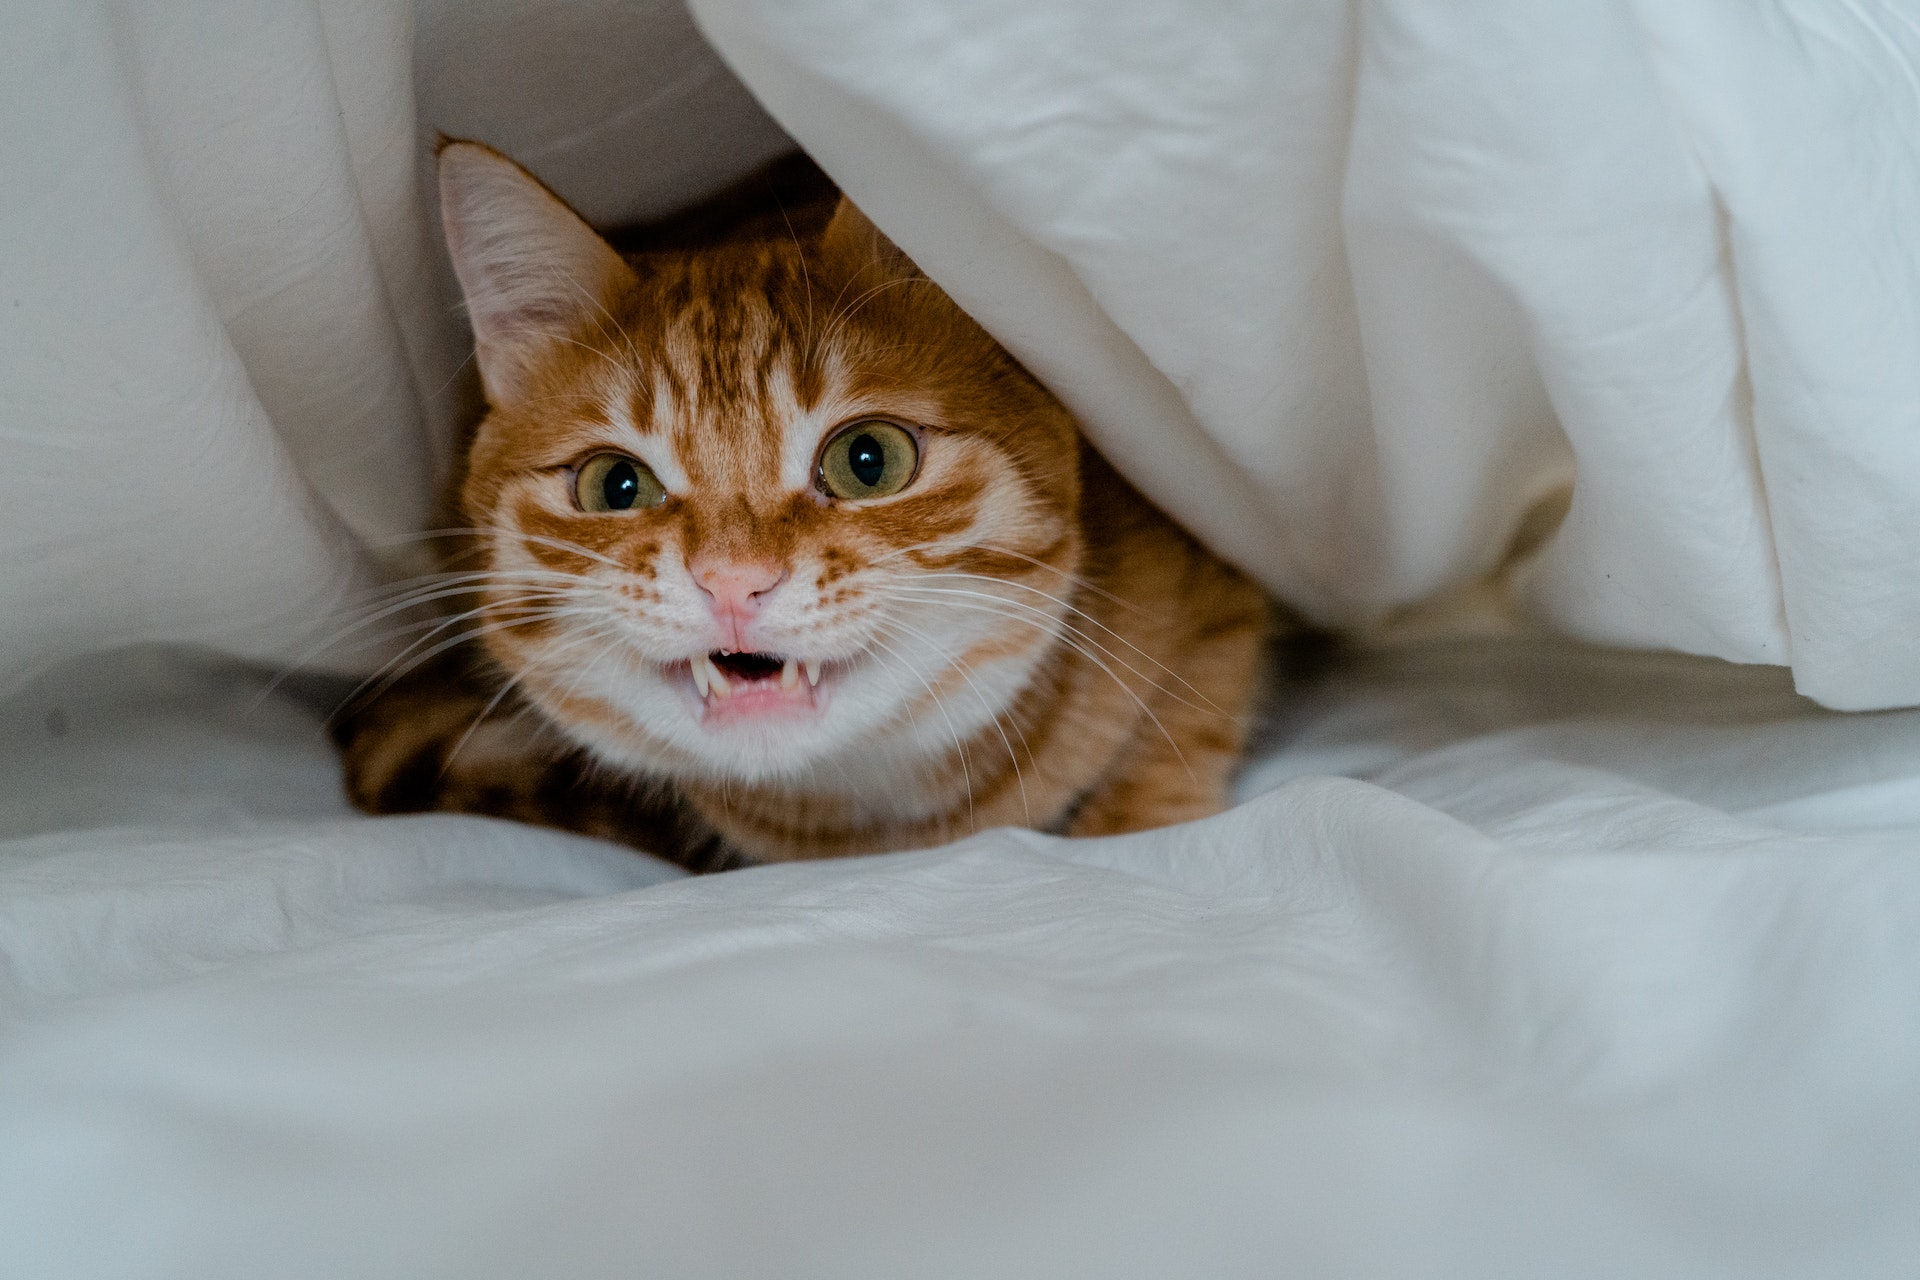 A hissing cat sitting under a blanket in bed